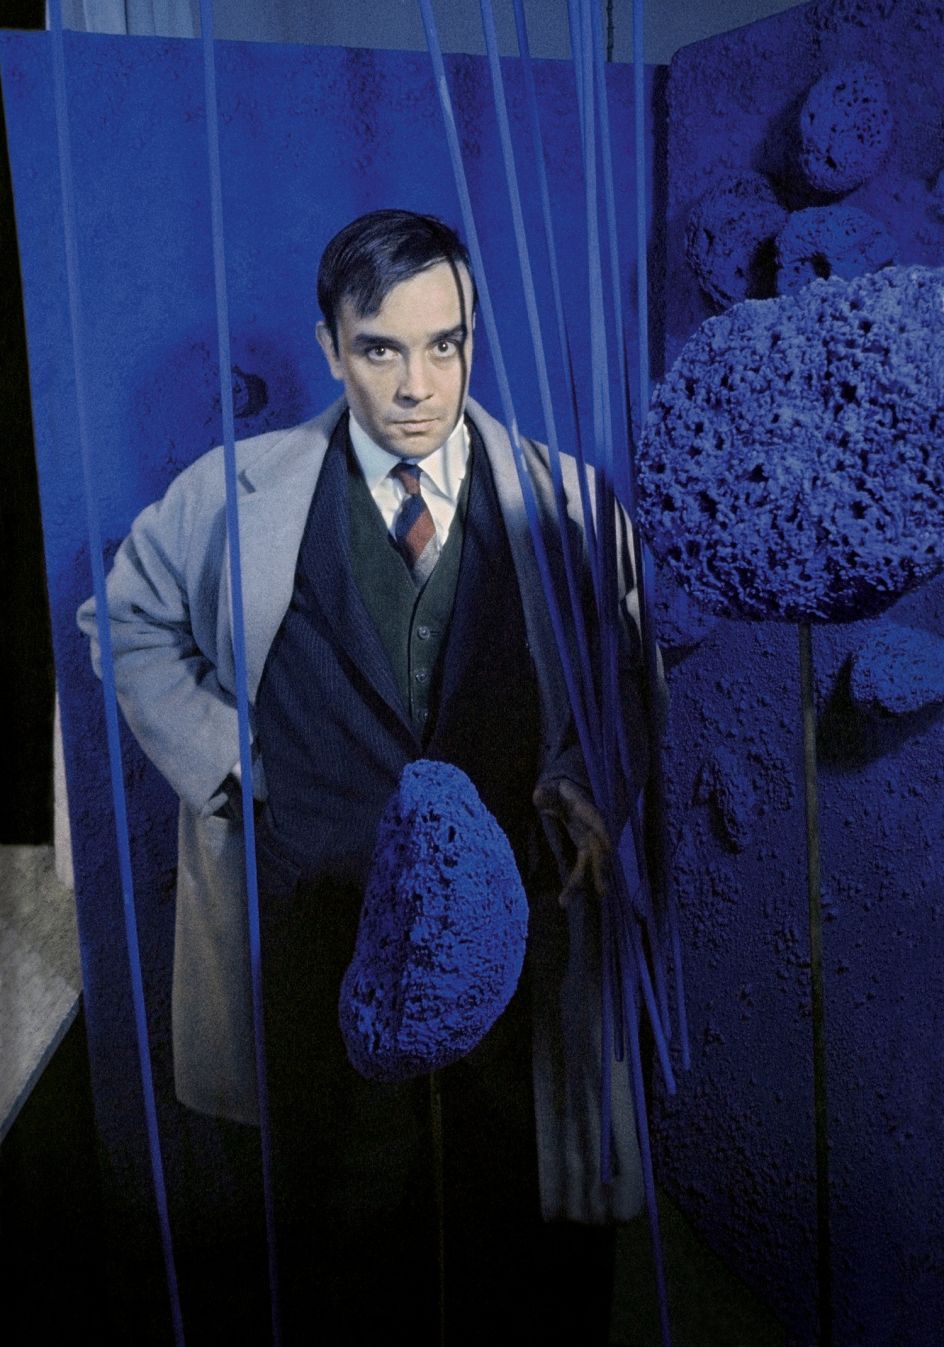 Yves Klein surrounded by his « Sponge Sculptures » during the opening of the exhibition 